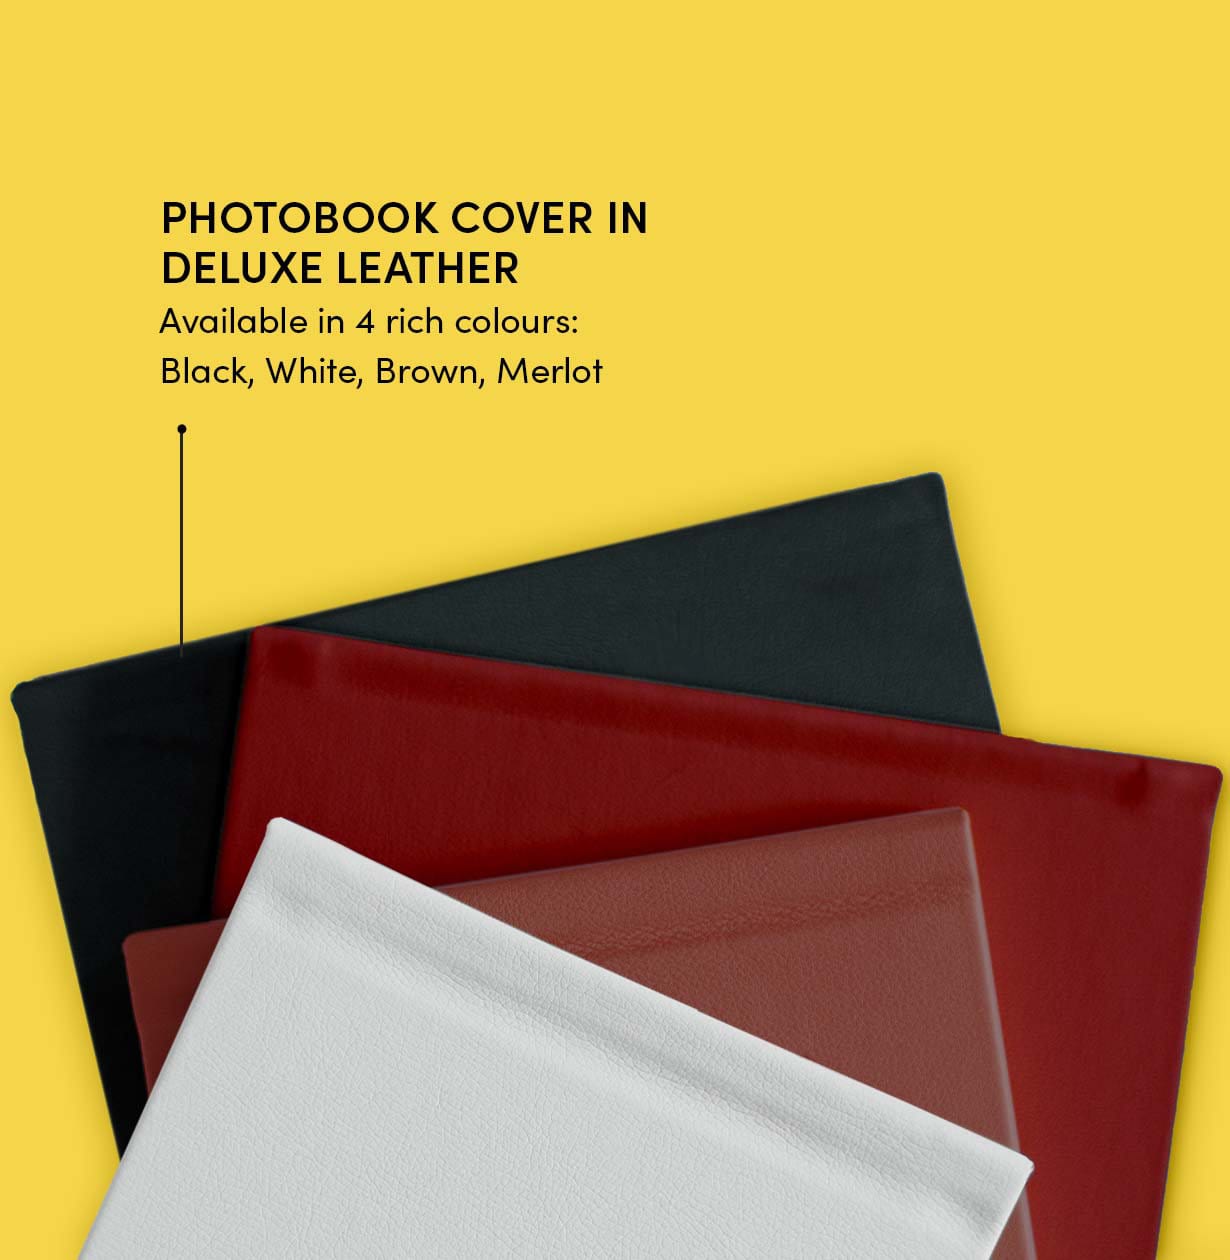 Leather Cover Options for Layflat Photo Books